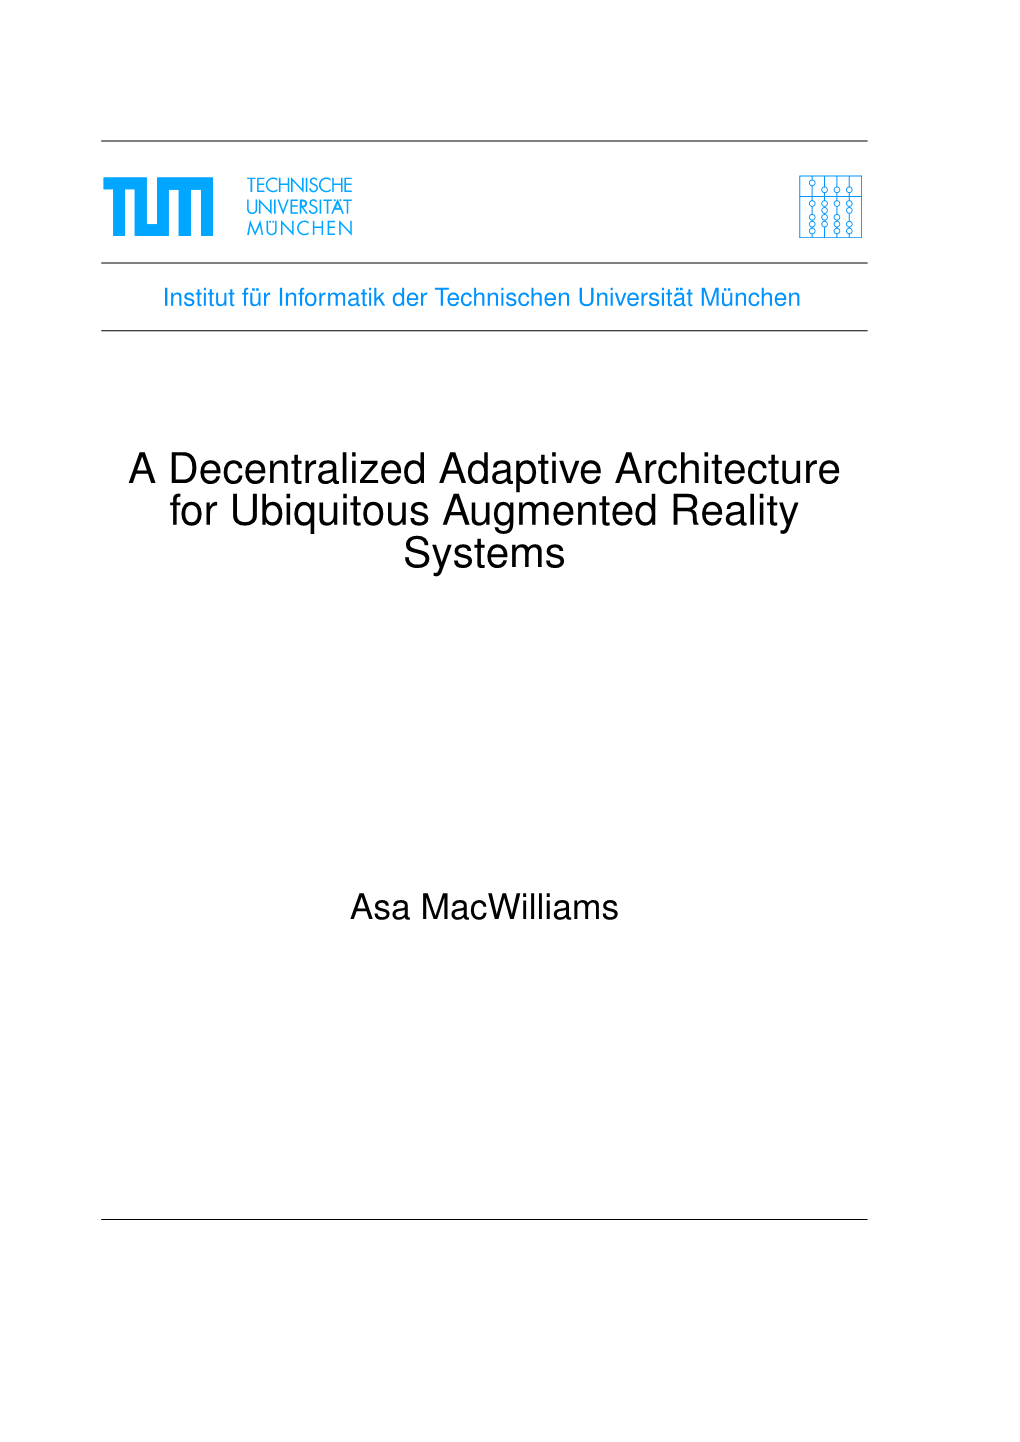 A Decentralized Adaptive Architecture for Ubiquitous Augmented Reality Systems